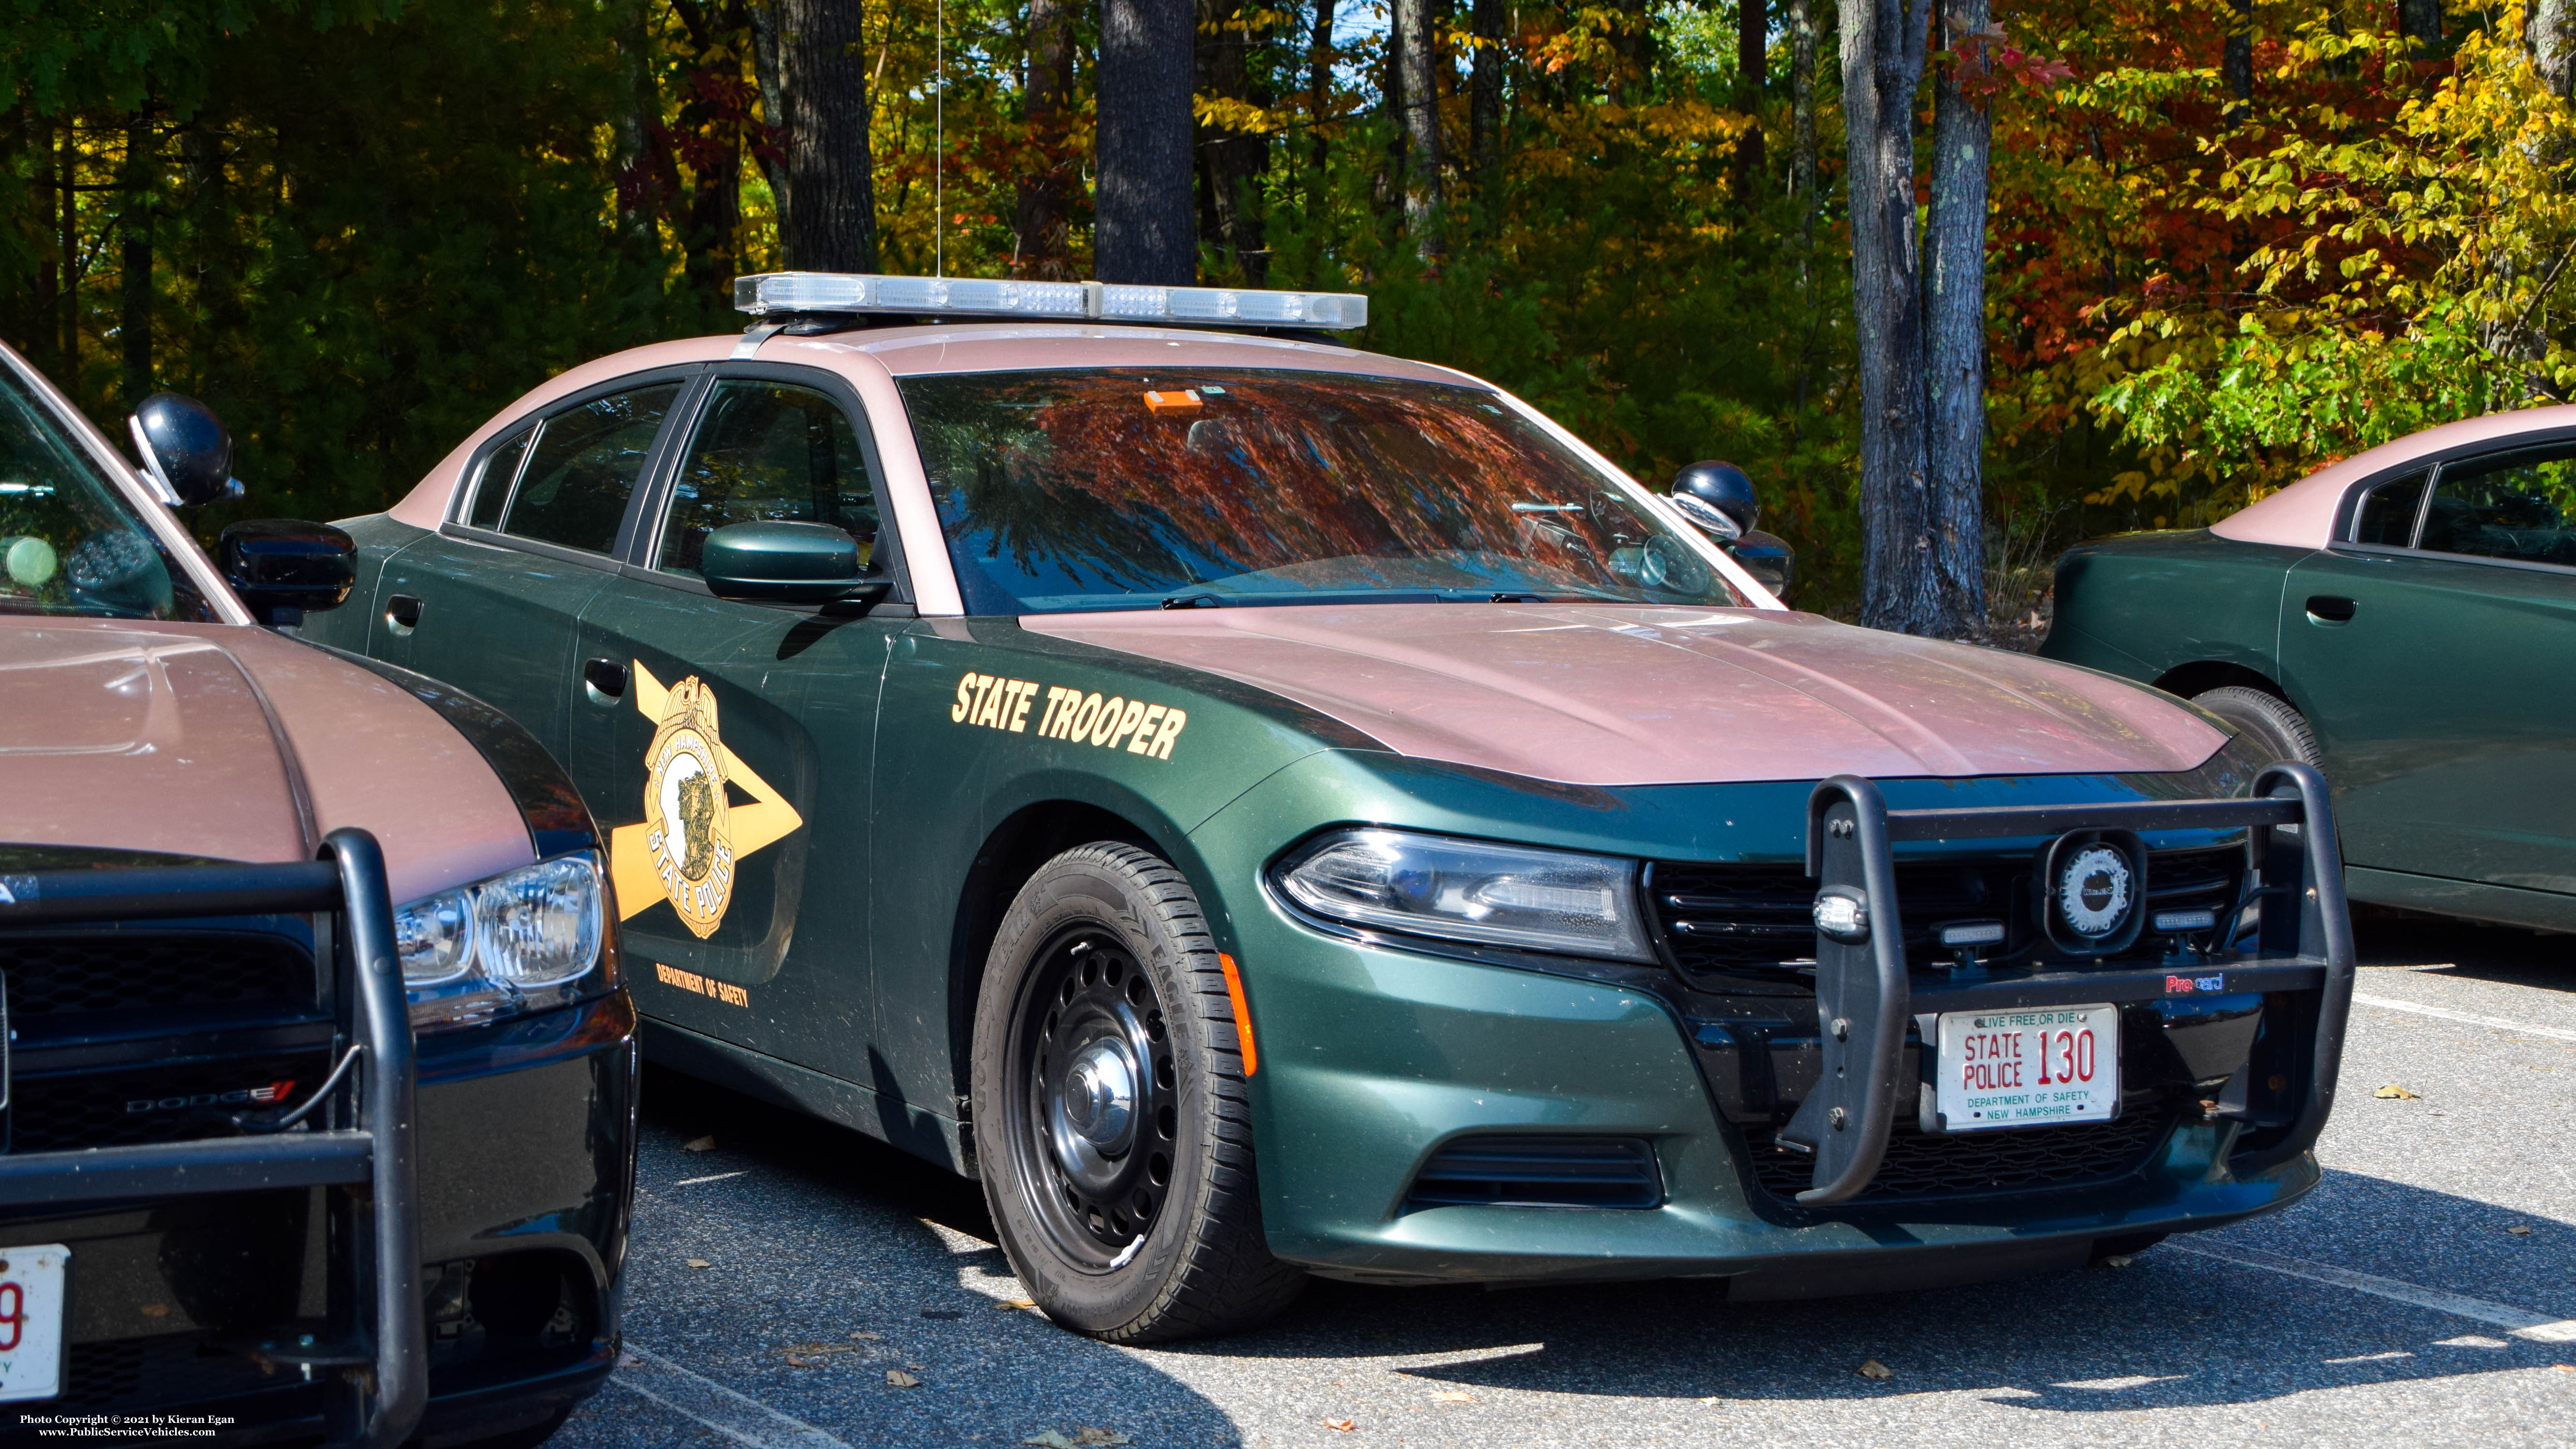 A photo  of New Hampshire State Police
            Cruiser 130, a 2015-2019 Dodge Charger             taken by Kieran Egan